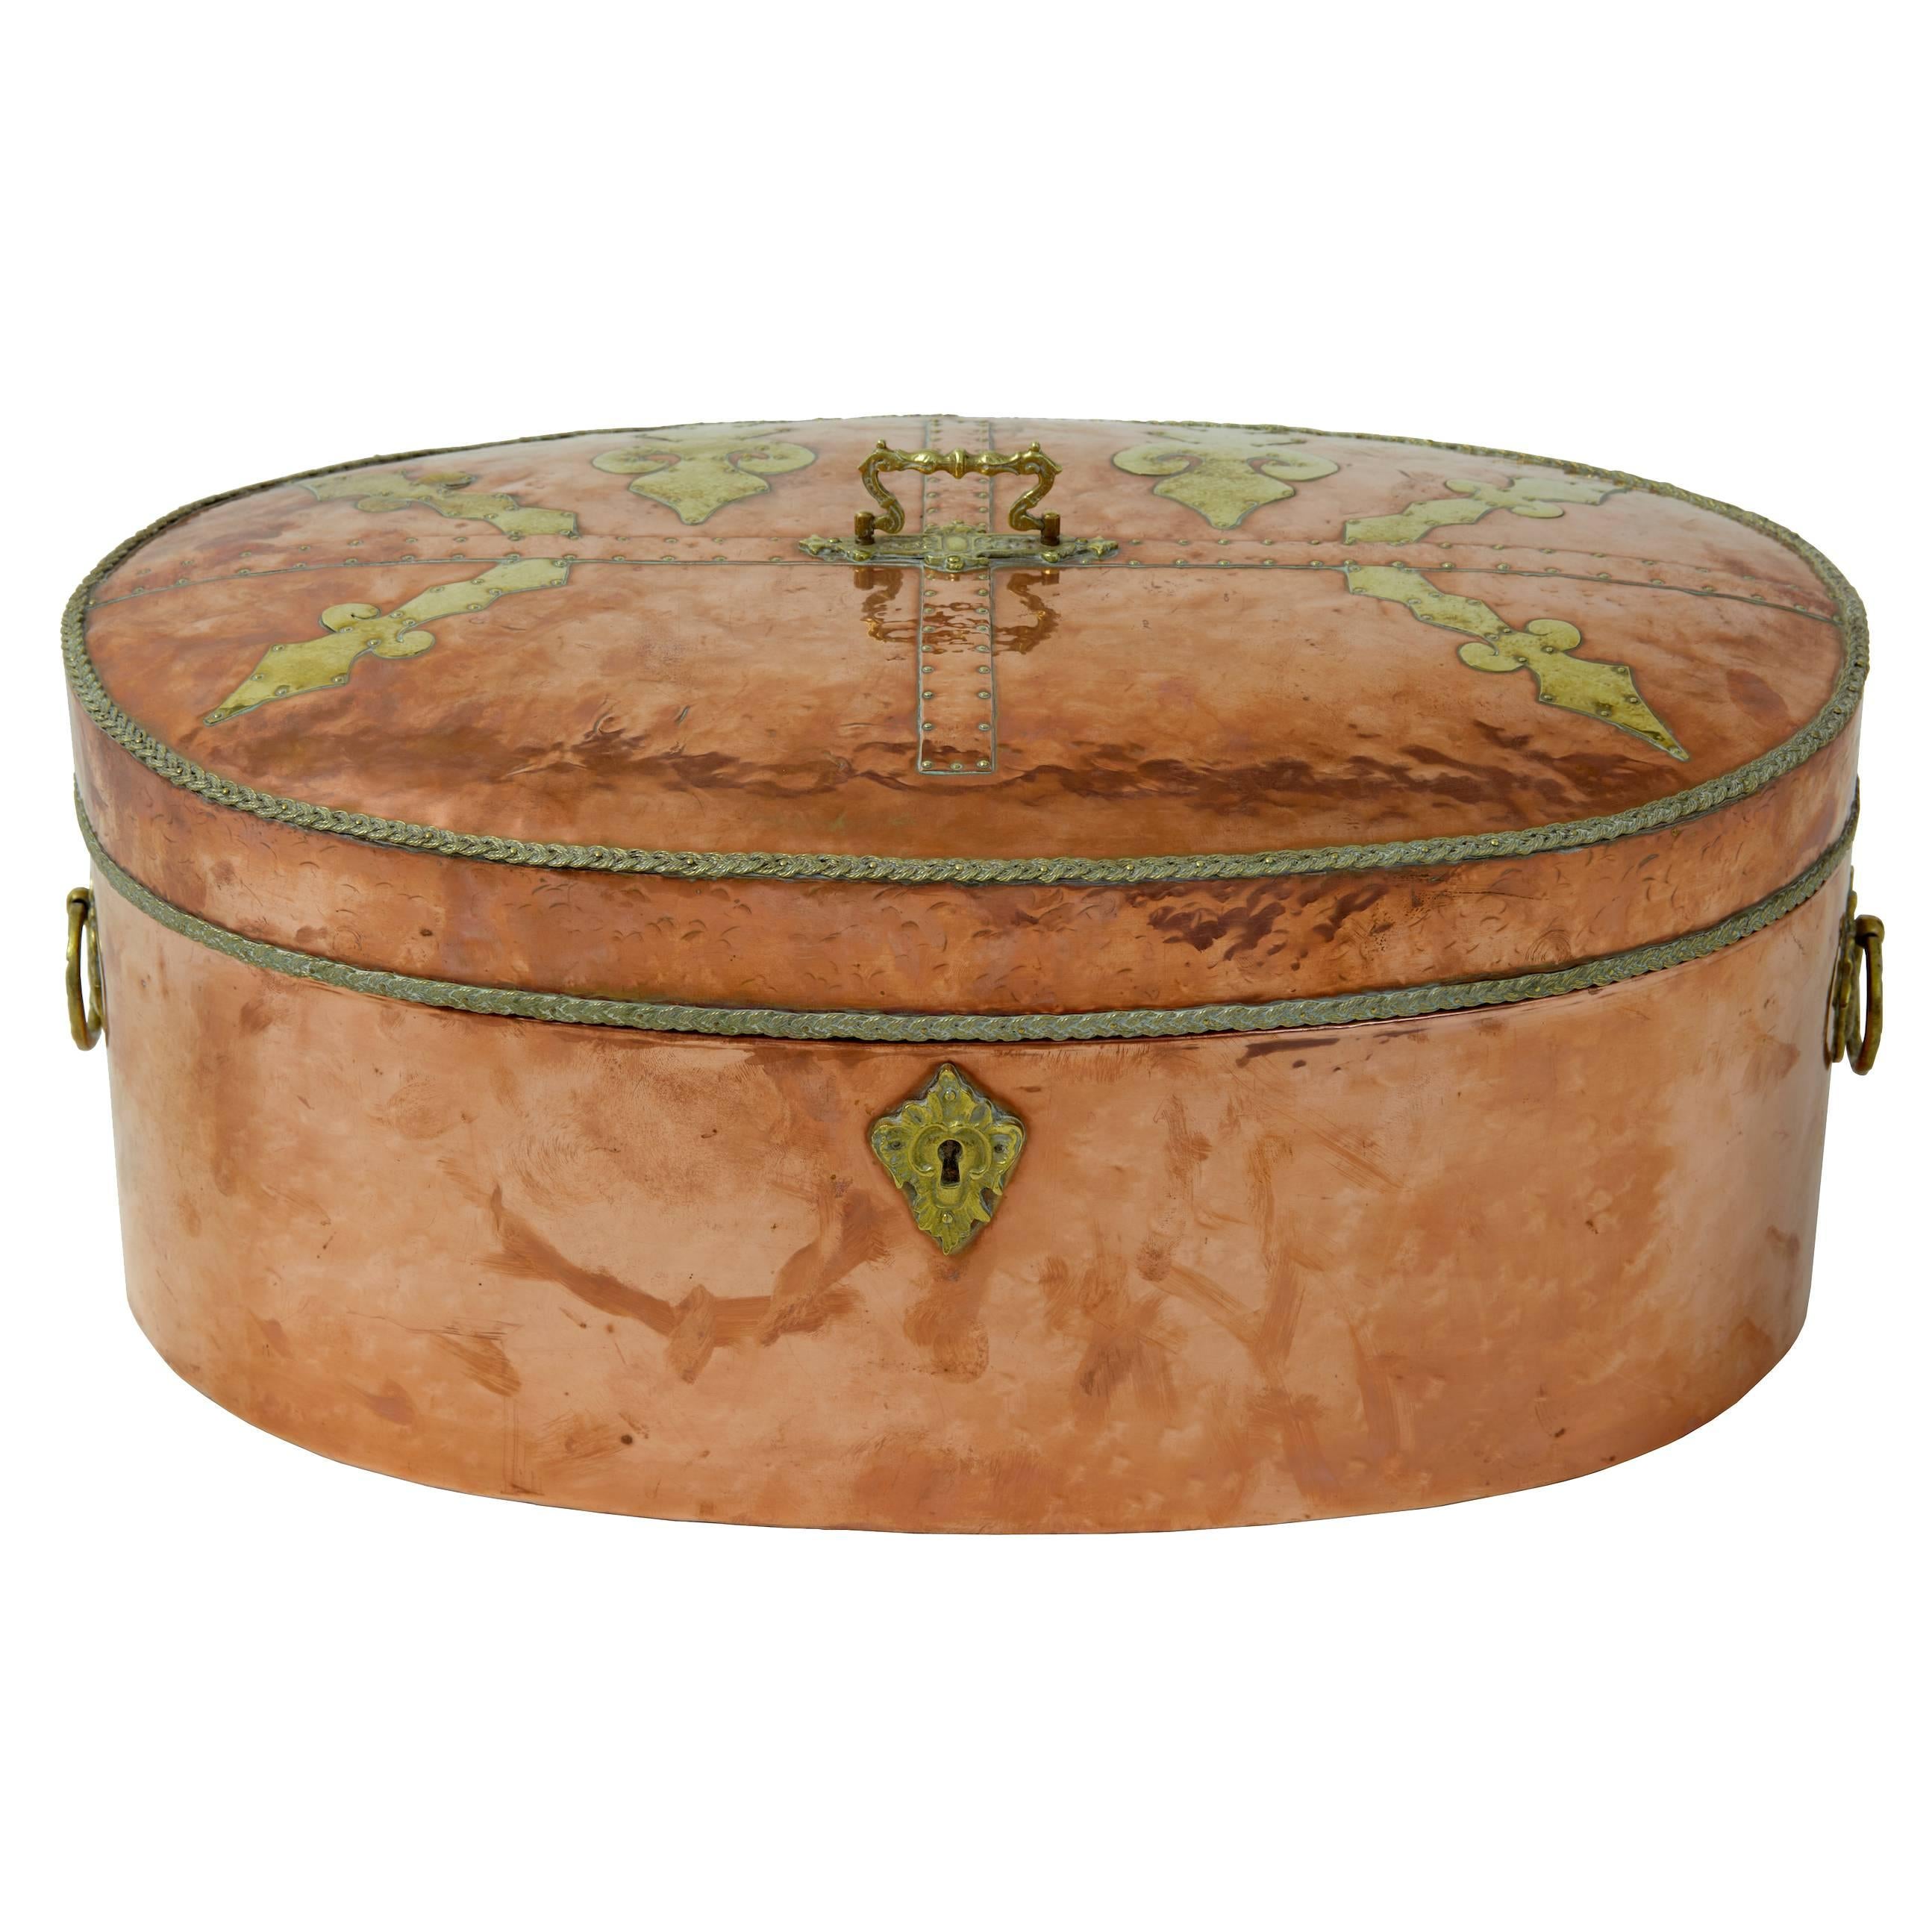 Early 20th Century Arts and Crafts Copper and Brass Box